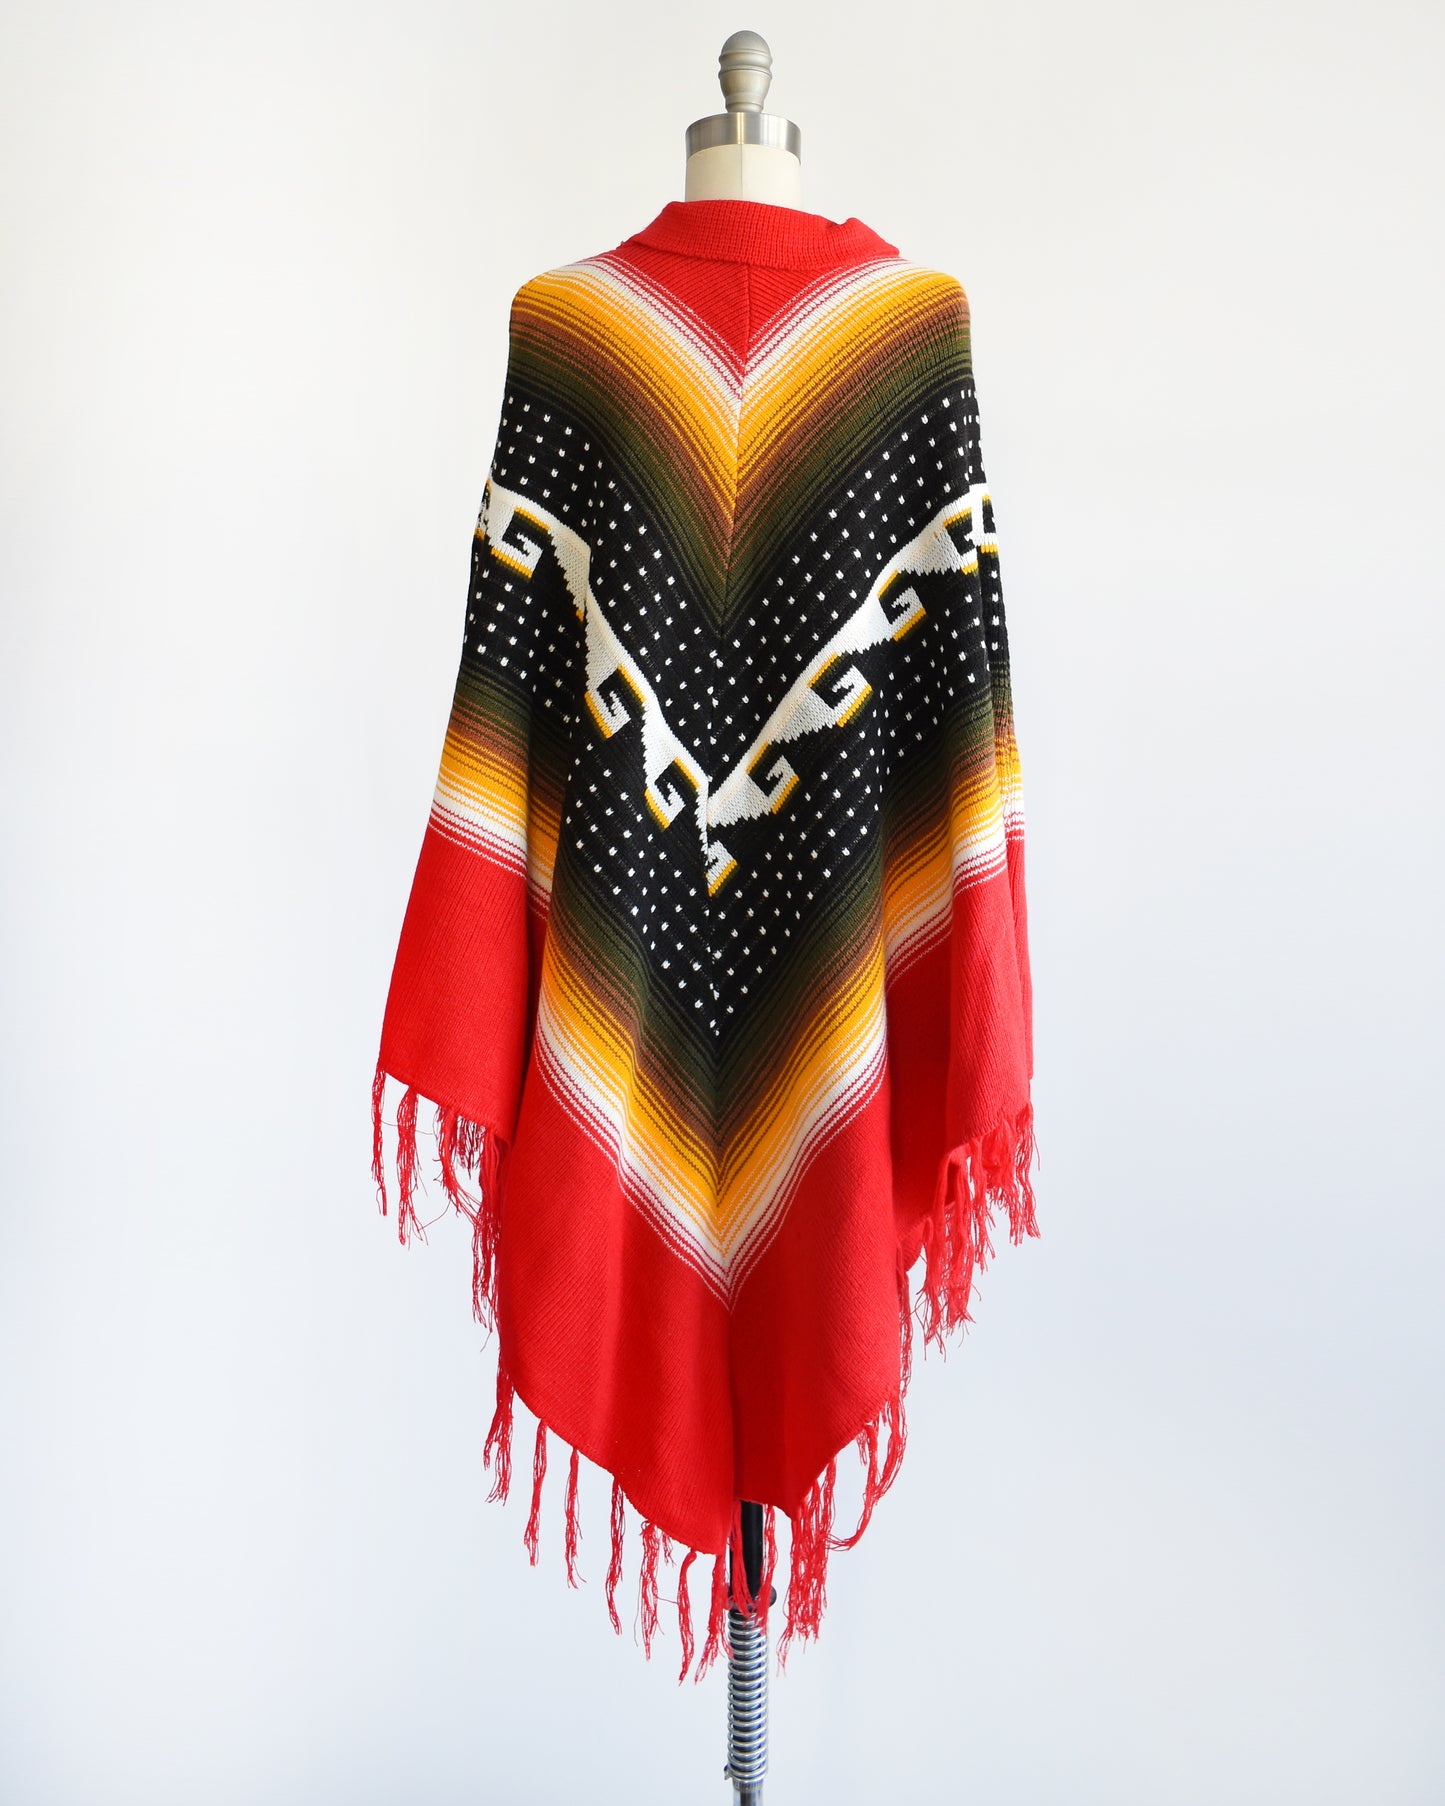 Back view of a vintage 1970s chevron striped fringe poncho that has a folded over red collar with and two tassels that can be tied into a bow.